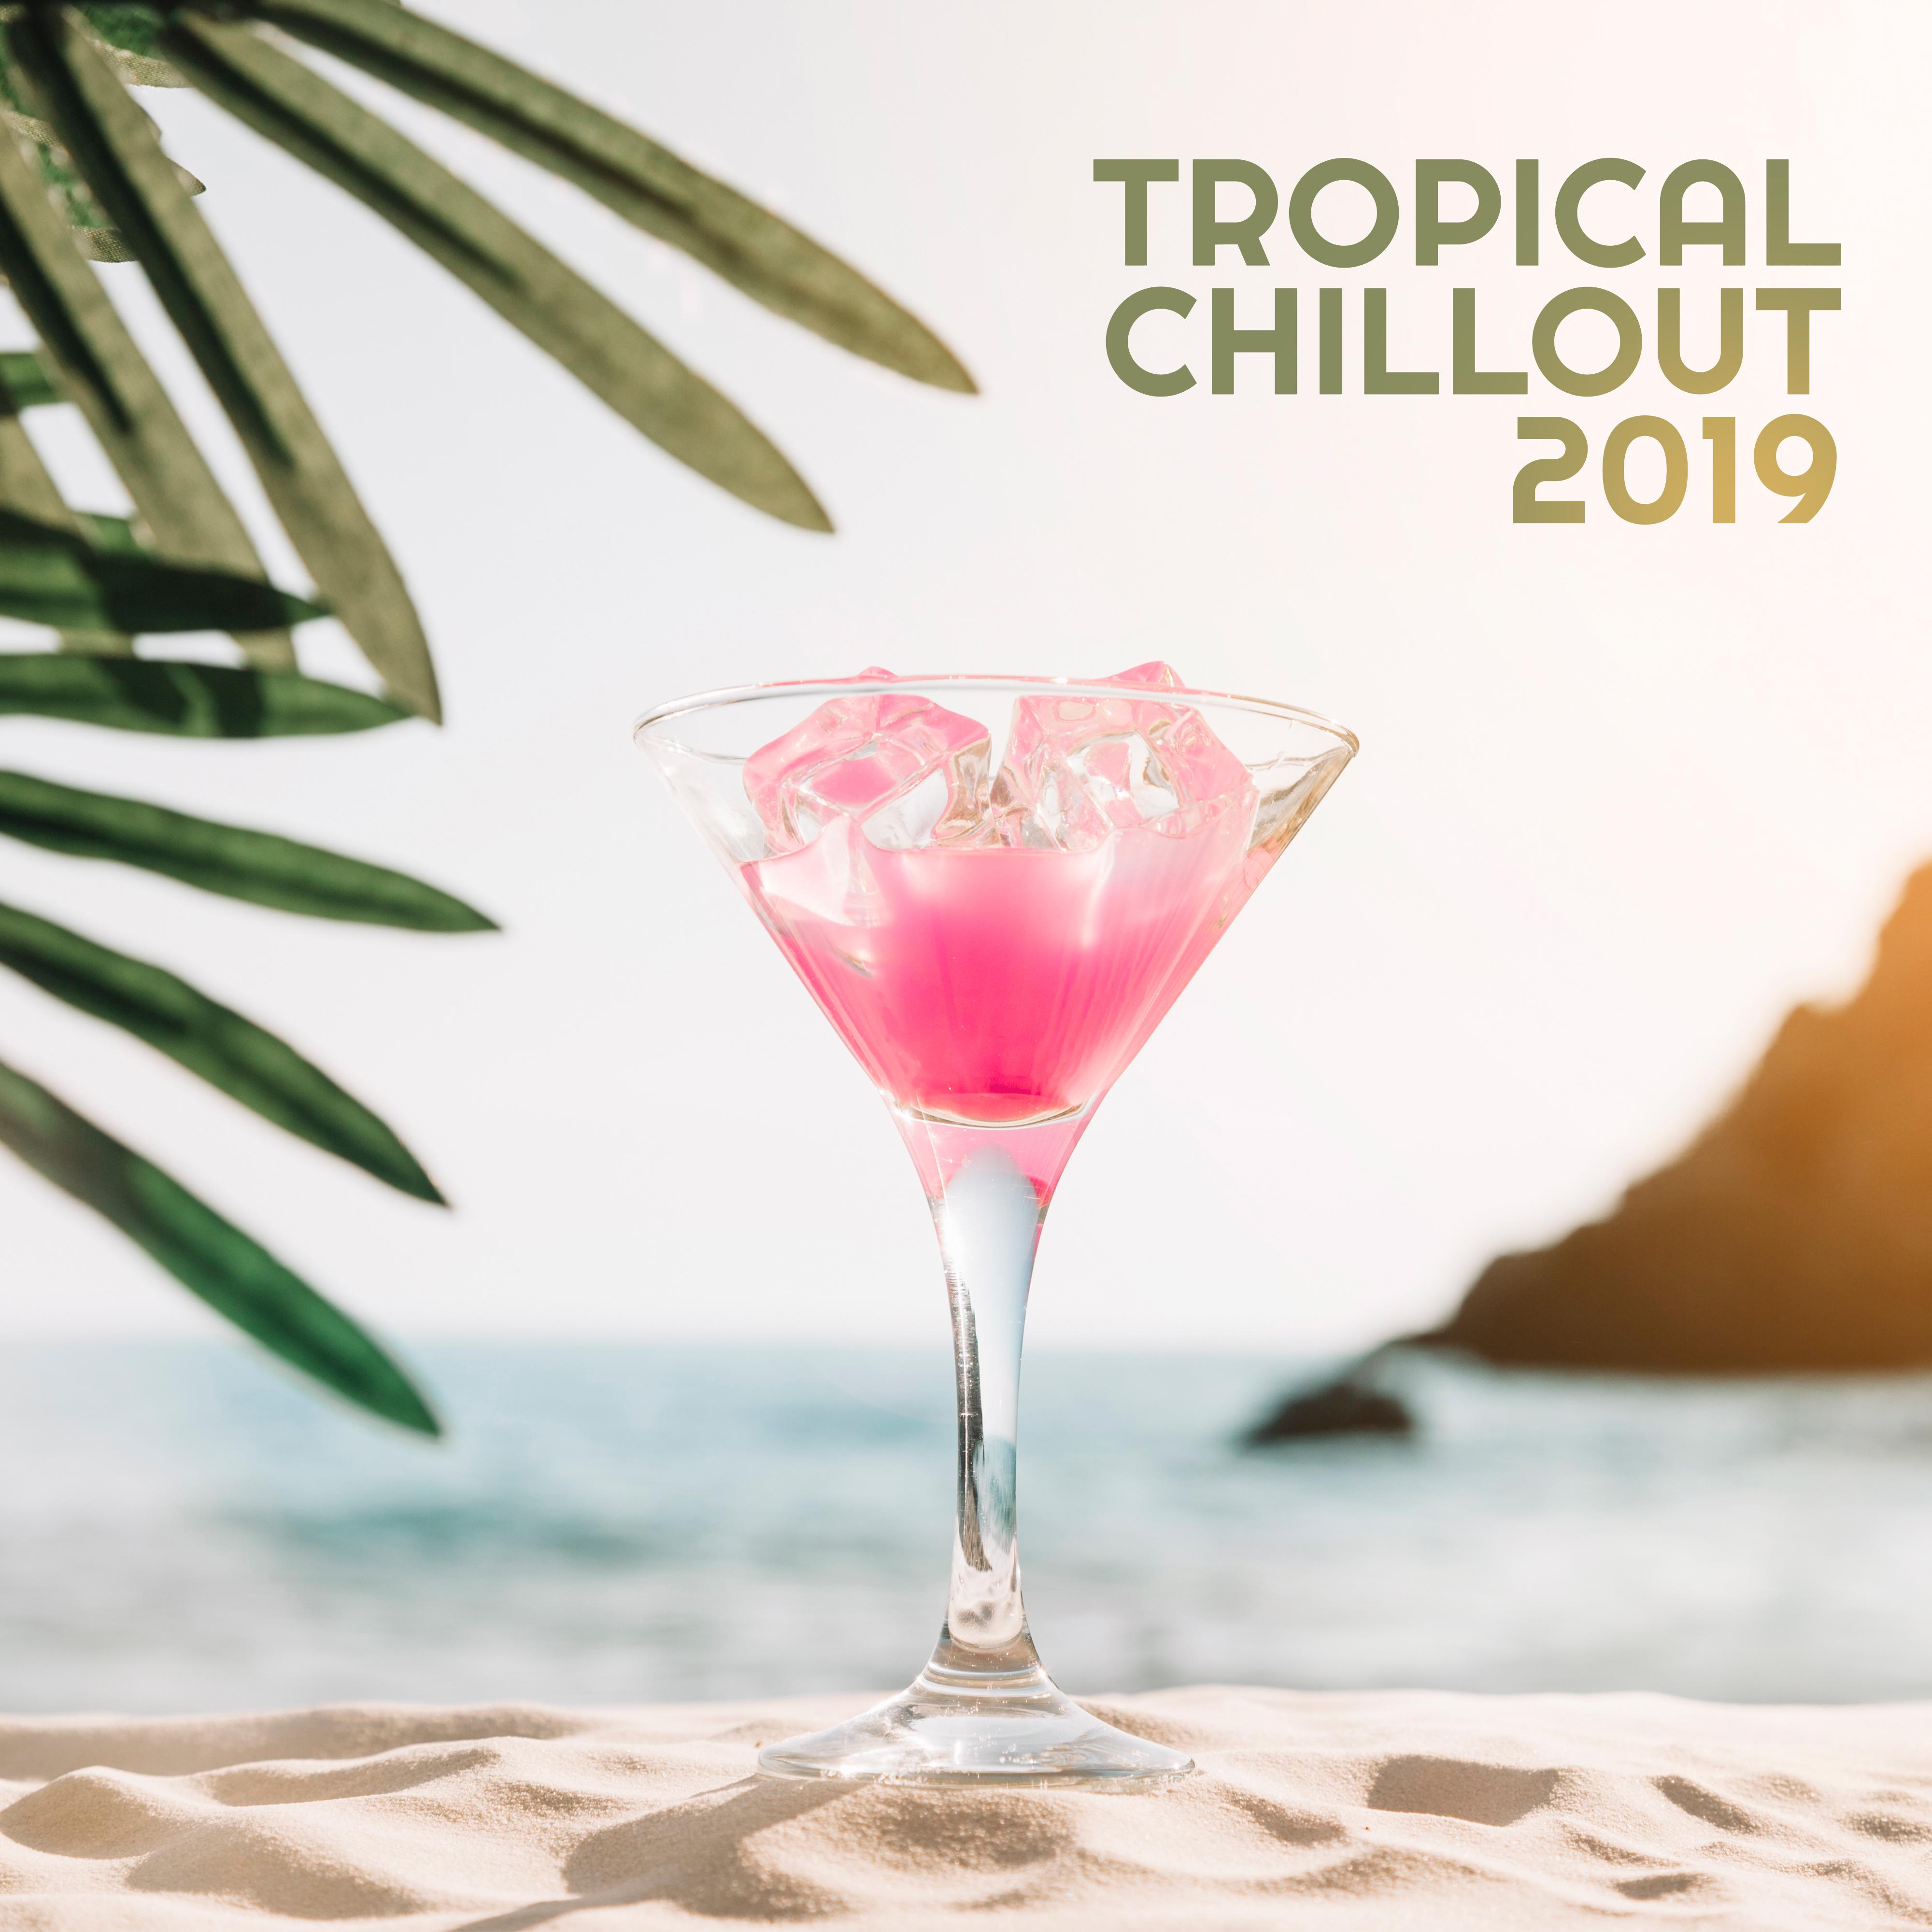 Tropical Chillout 2019 – Summer Electronic Vibes, Rest Under the Palms, Calming On the Beach